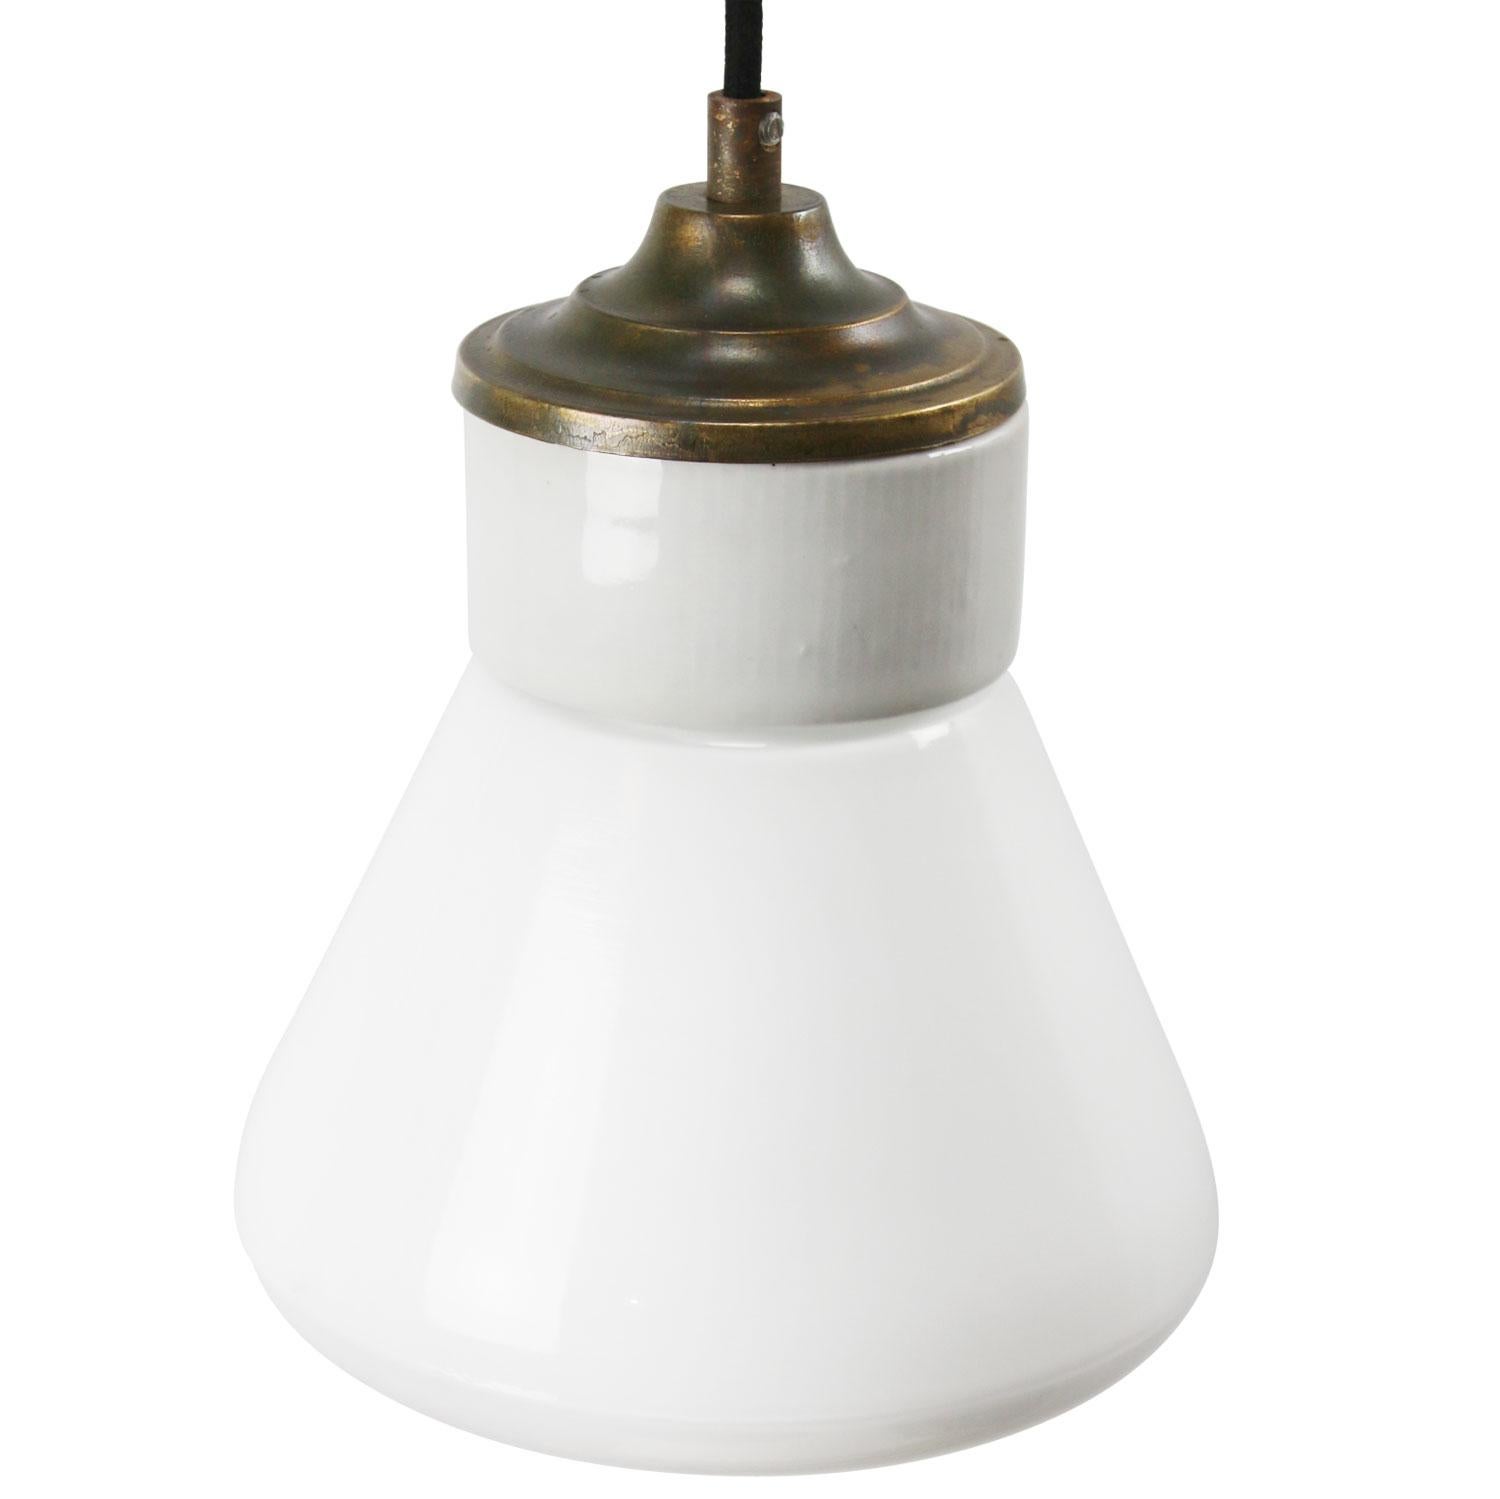 Porcelain industrial hanging lamp.
White porcelain, brass and opaline glass.
Wired for 110 volt or 220 volt
2 conductors, no ground.

Weight: 1.40 kg / 3.1 lb

Priced per individual item. All lamps have been made suitable by international